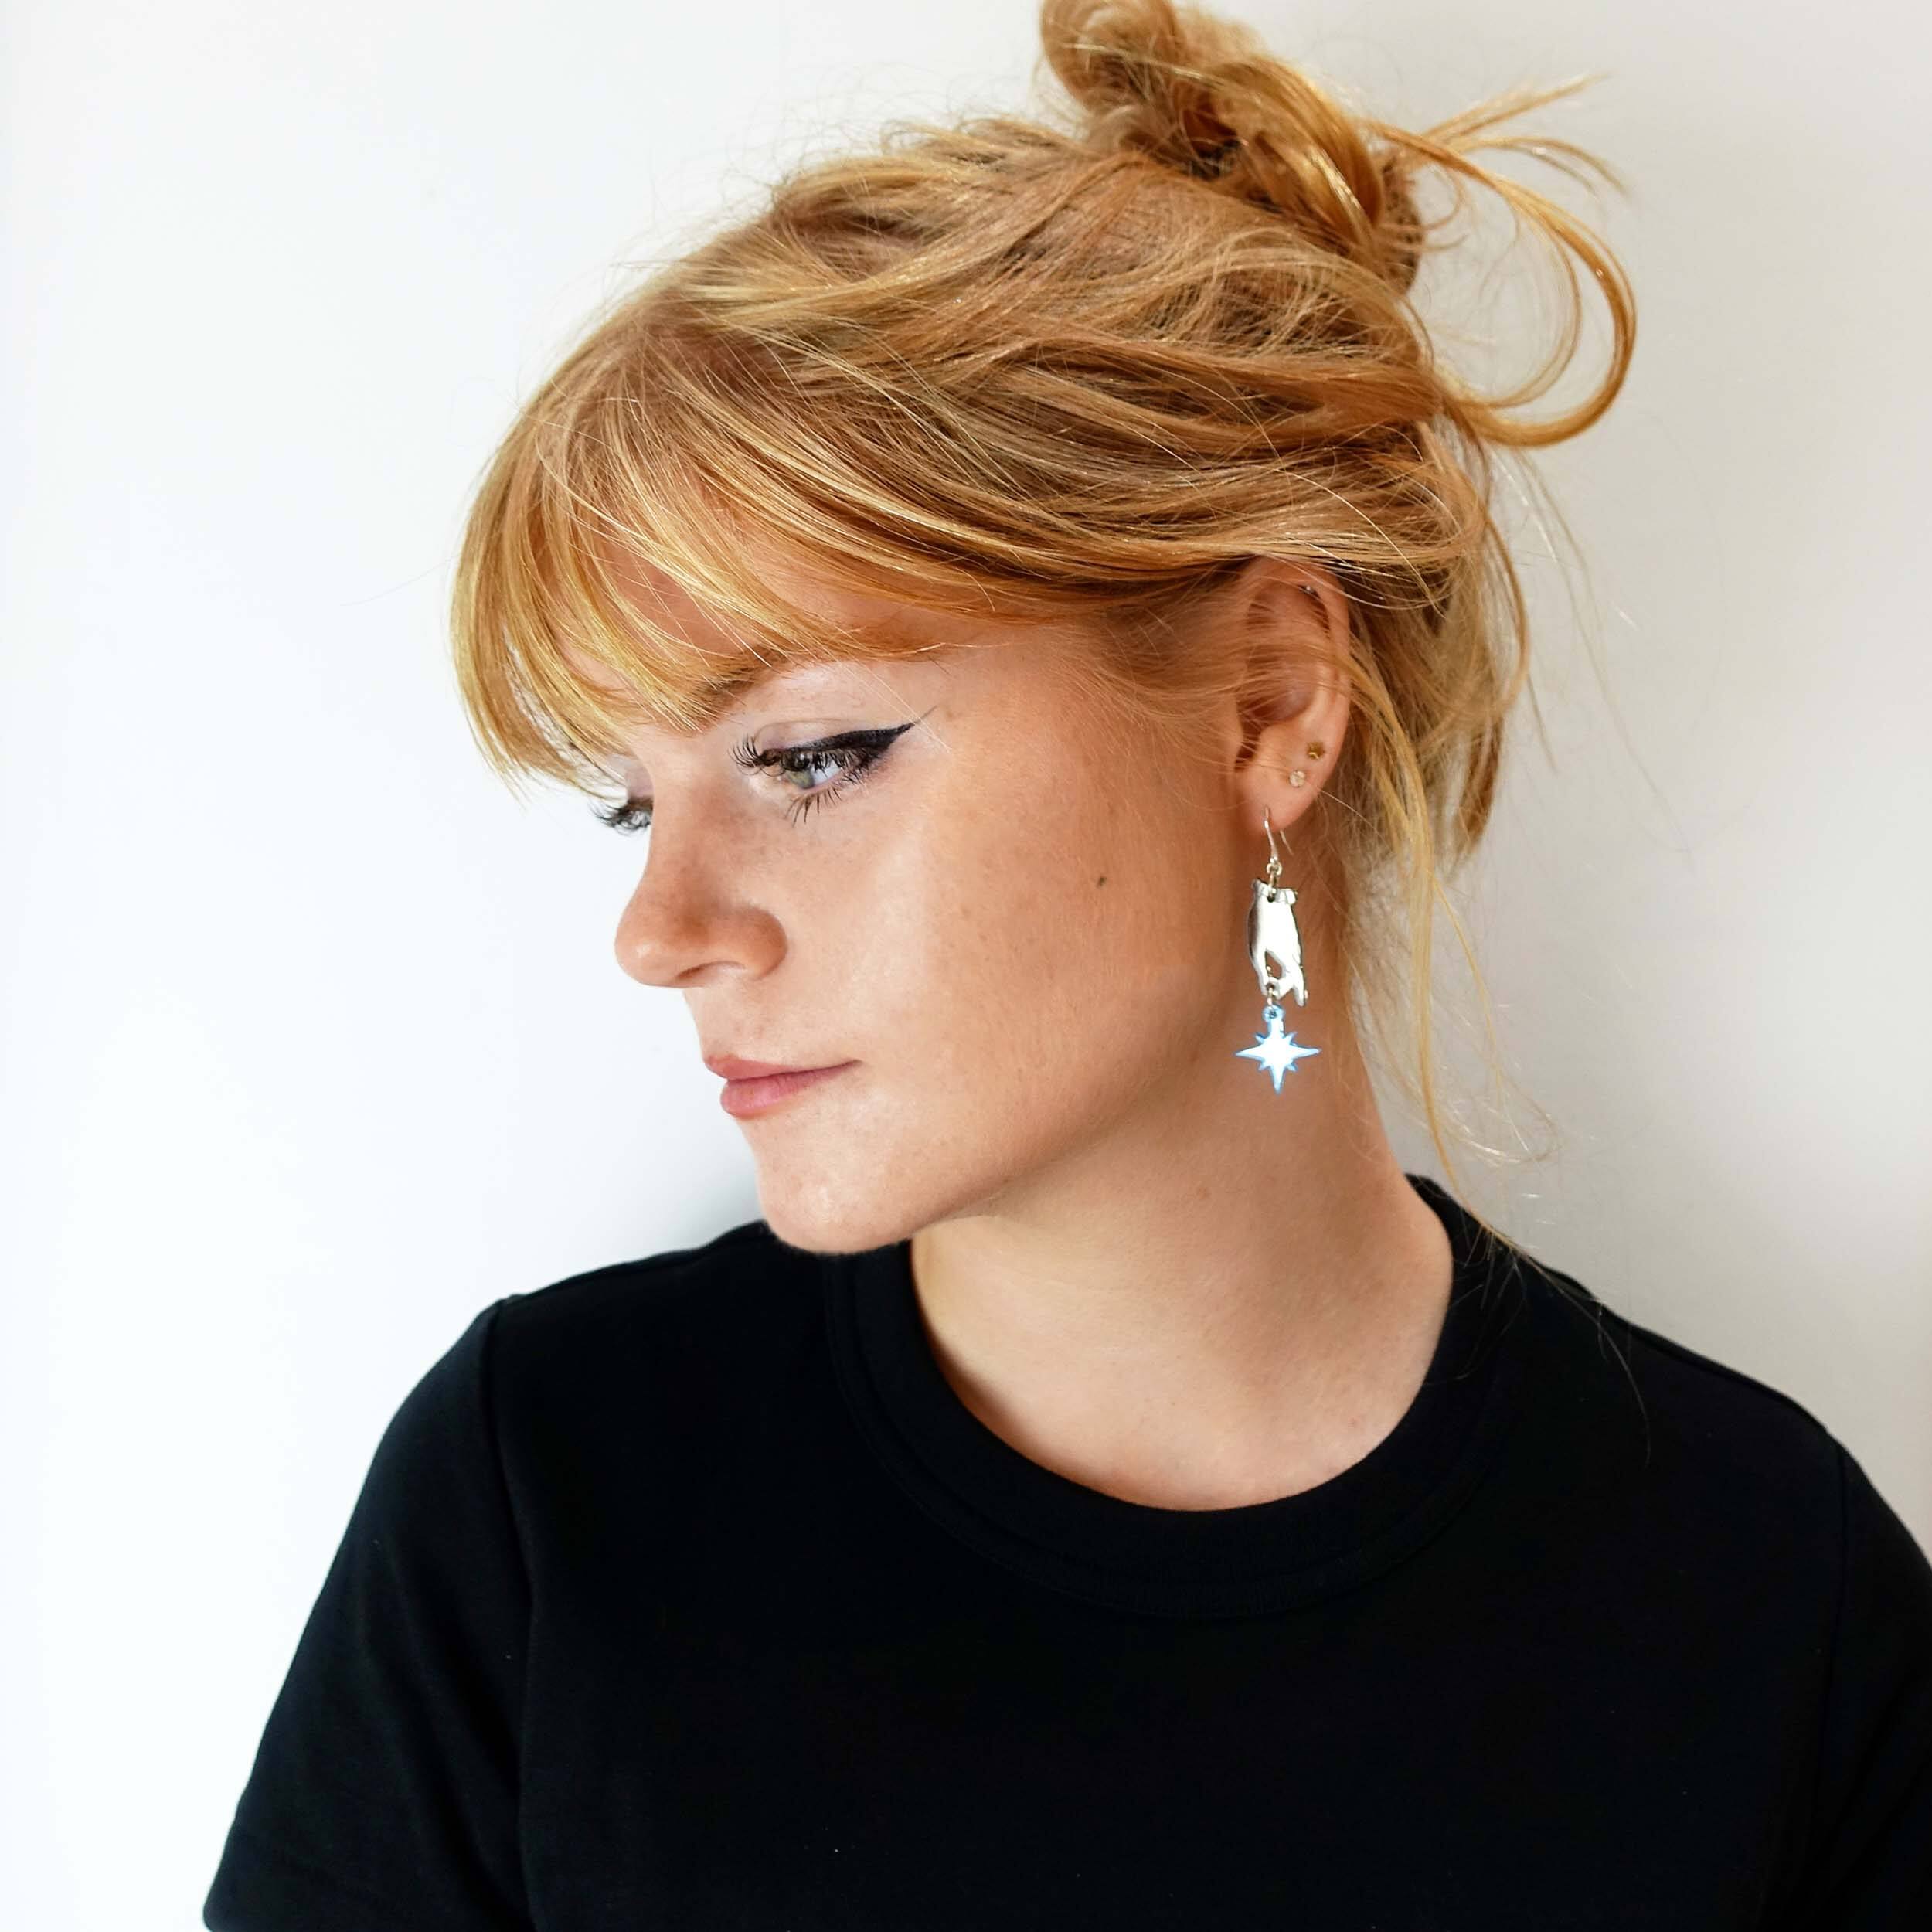 Eliza wears Dreams and Stars earrings from the Brontë Collection, designed by Sarah Day in collaboration with the Brontë Parsonage Museum. 